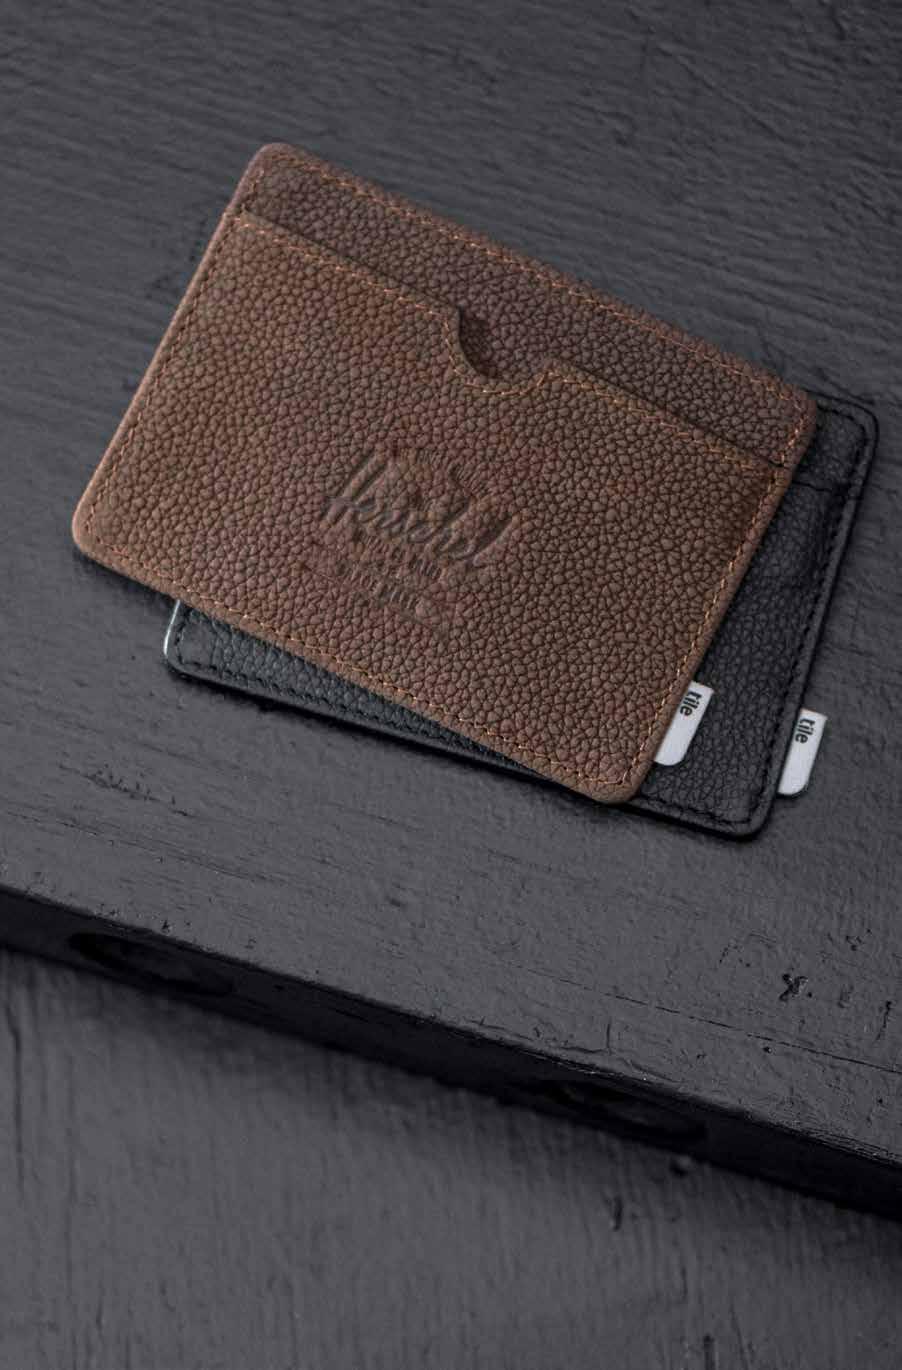 050 TILE - 10421 CHARLIE LEATHER Tile Slim Bluetooth tracker + + High quality textured